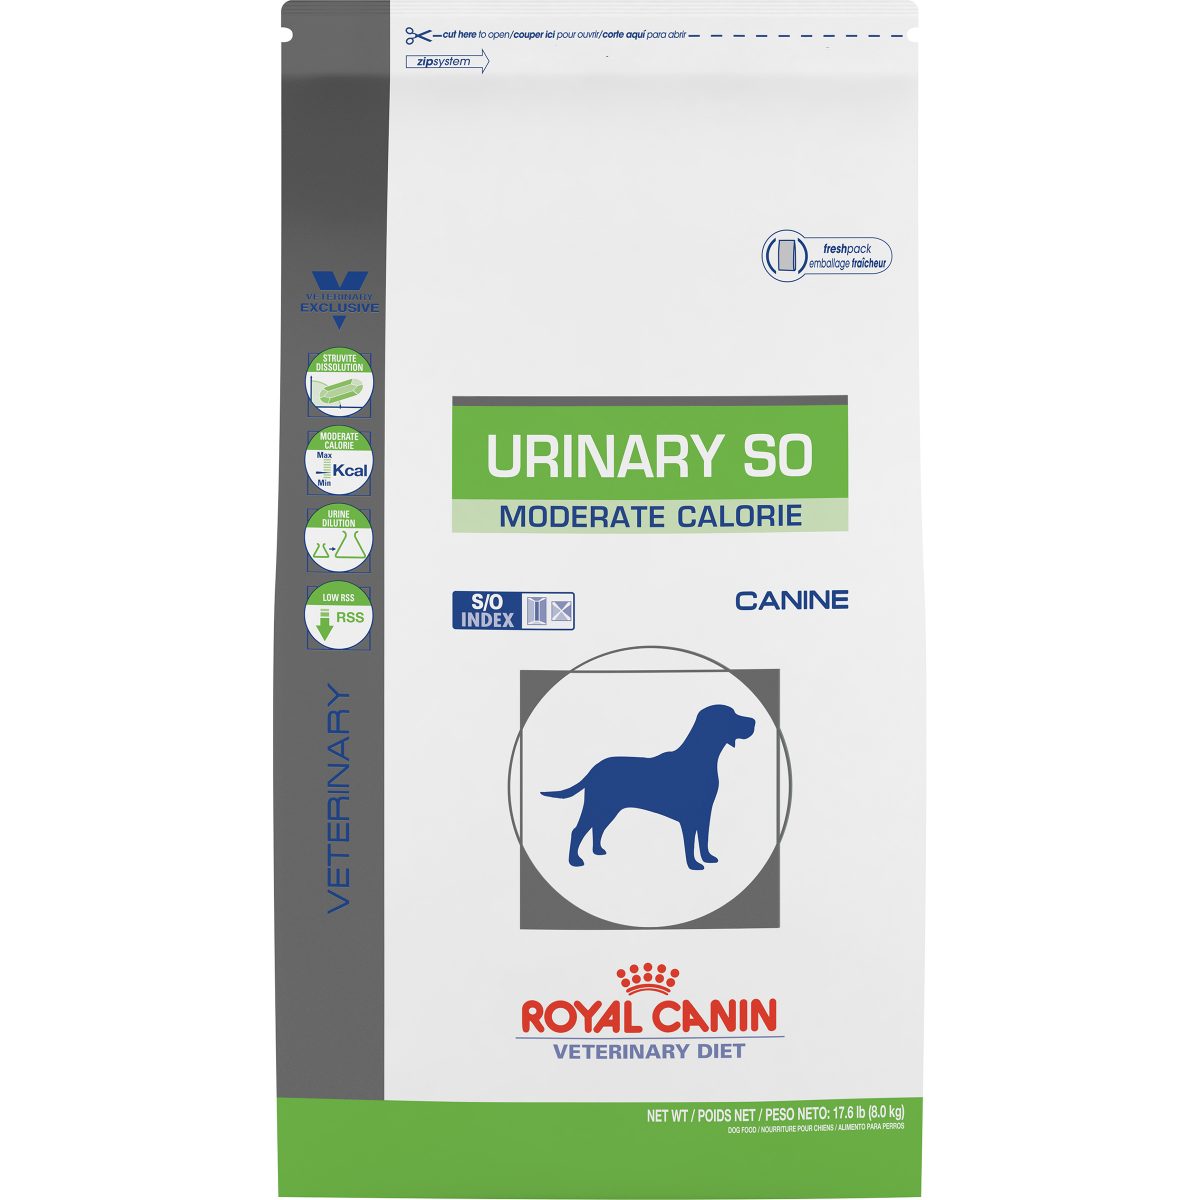 Canine Urinary SO Moderate Calorie Dry Dog Food